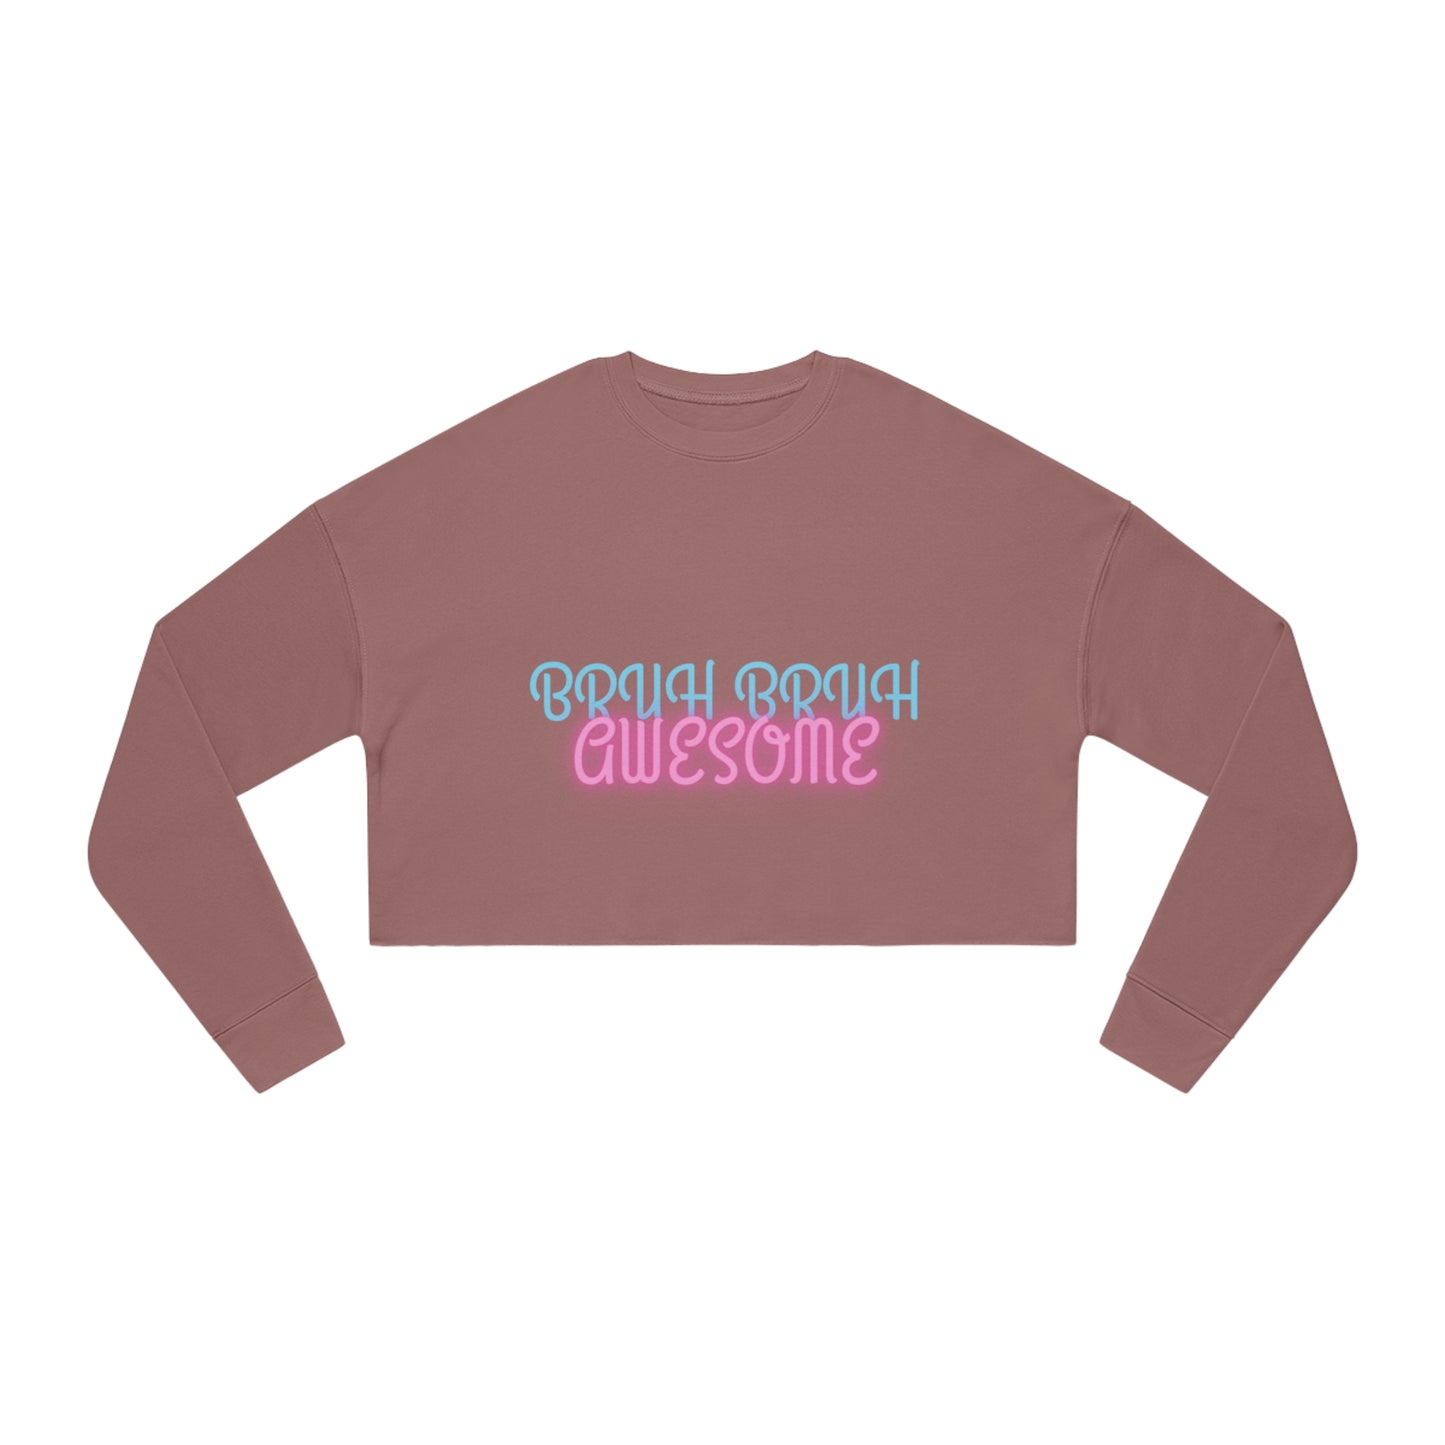 "Bruh bruh awesome" Women's Cropped Sweatshirt